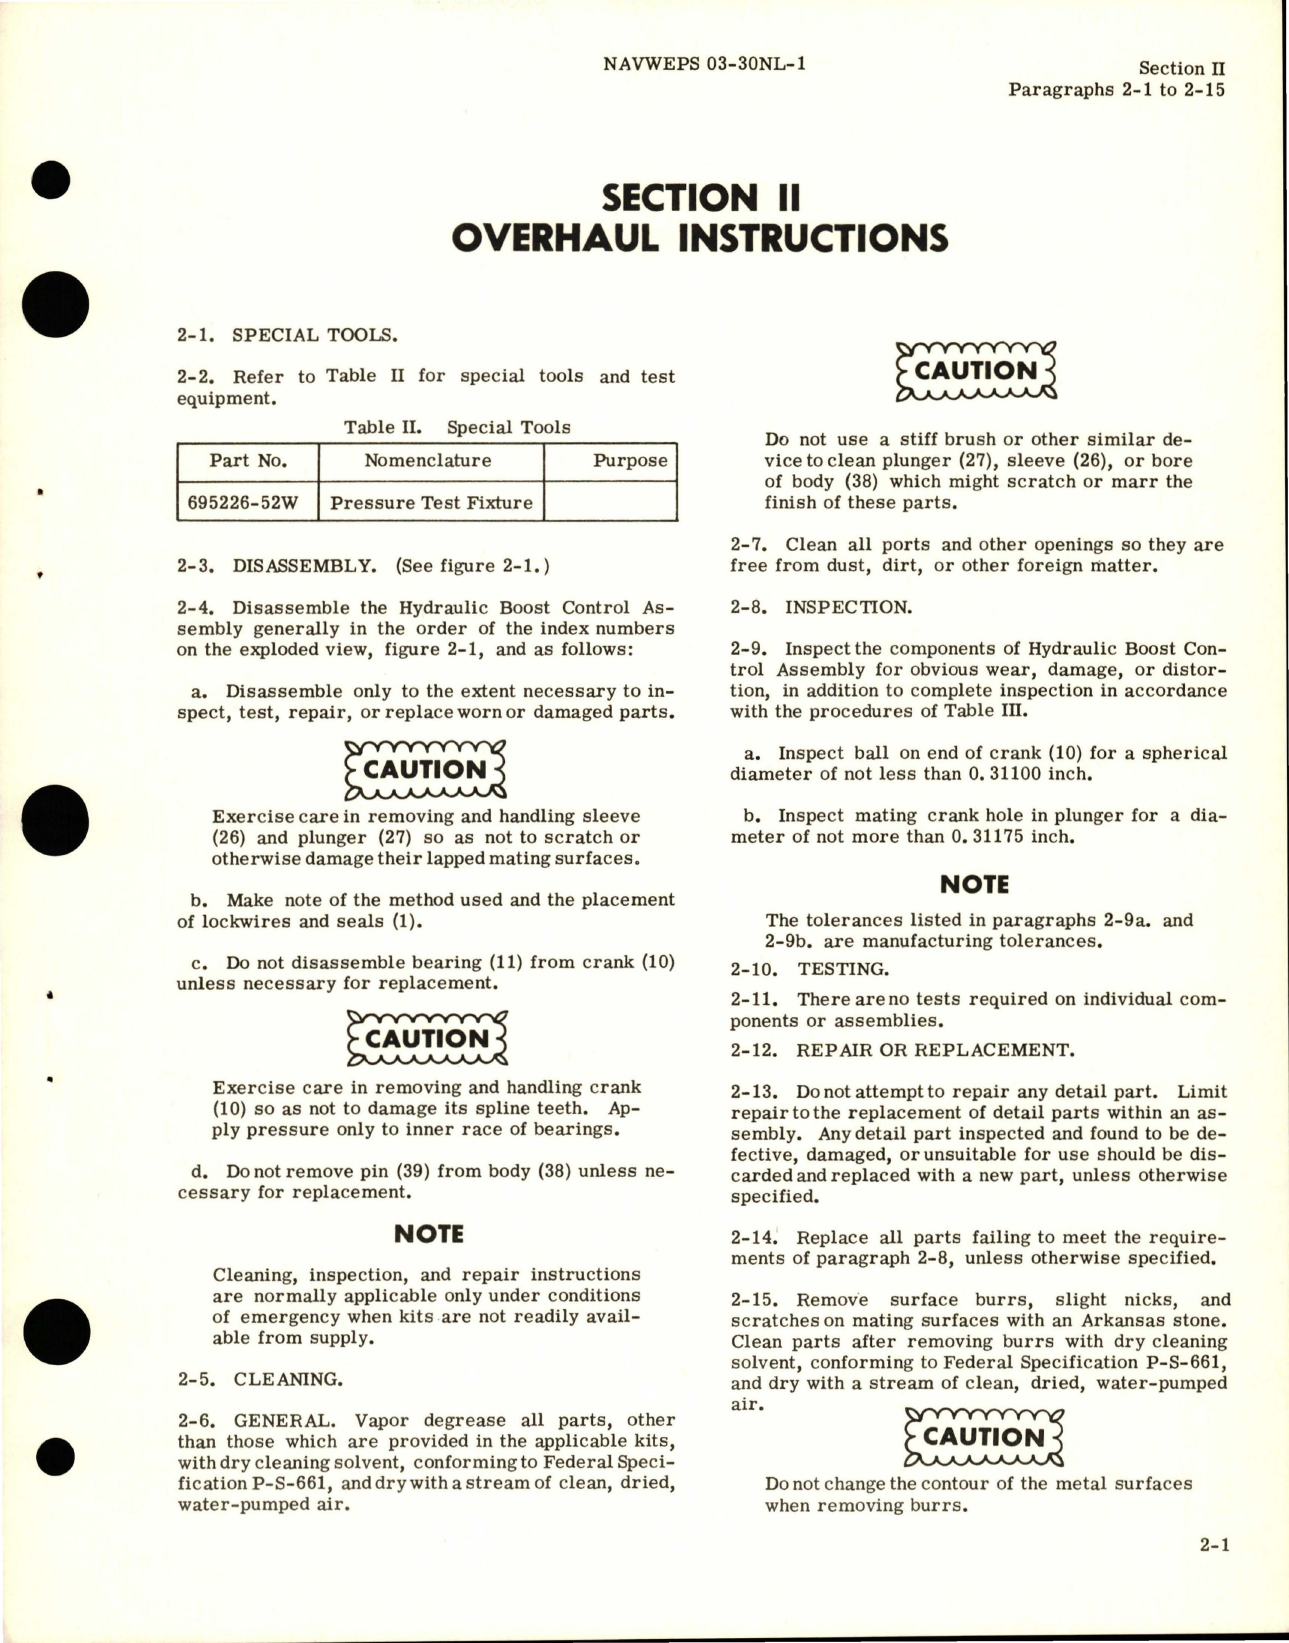 Sample page 7 from AirCorps Library document: Overhaul Instructions for Hydraulic Boost Control Assembly - Parts 137200-3, 137200-4, and 137200-5